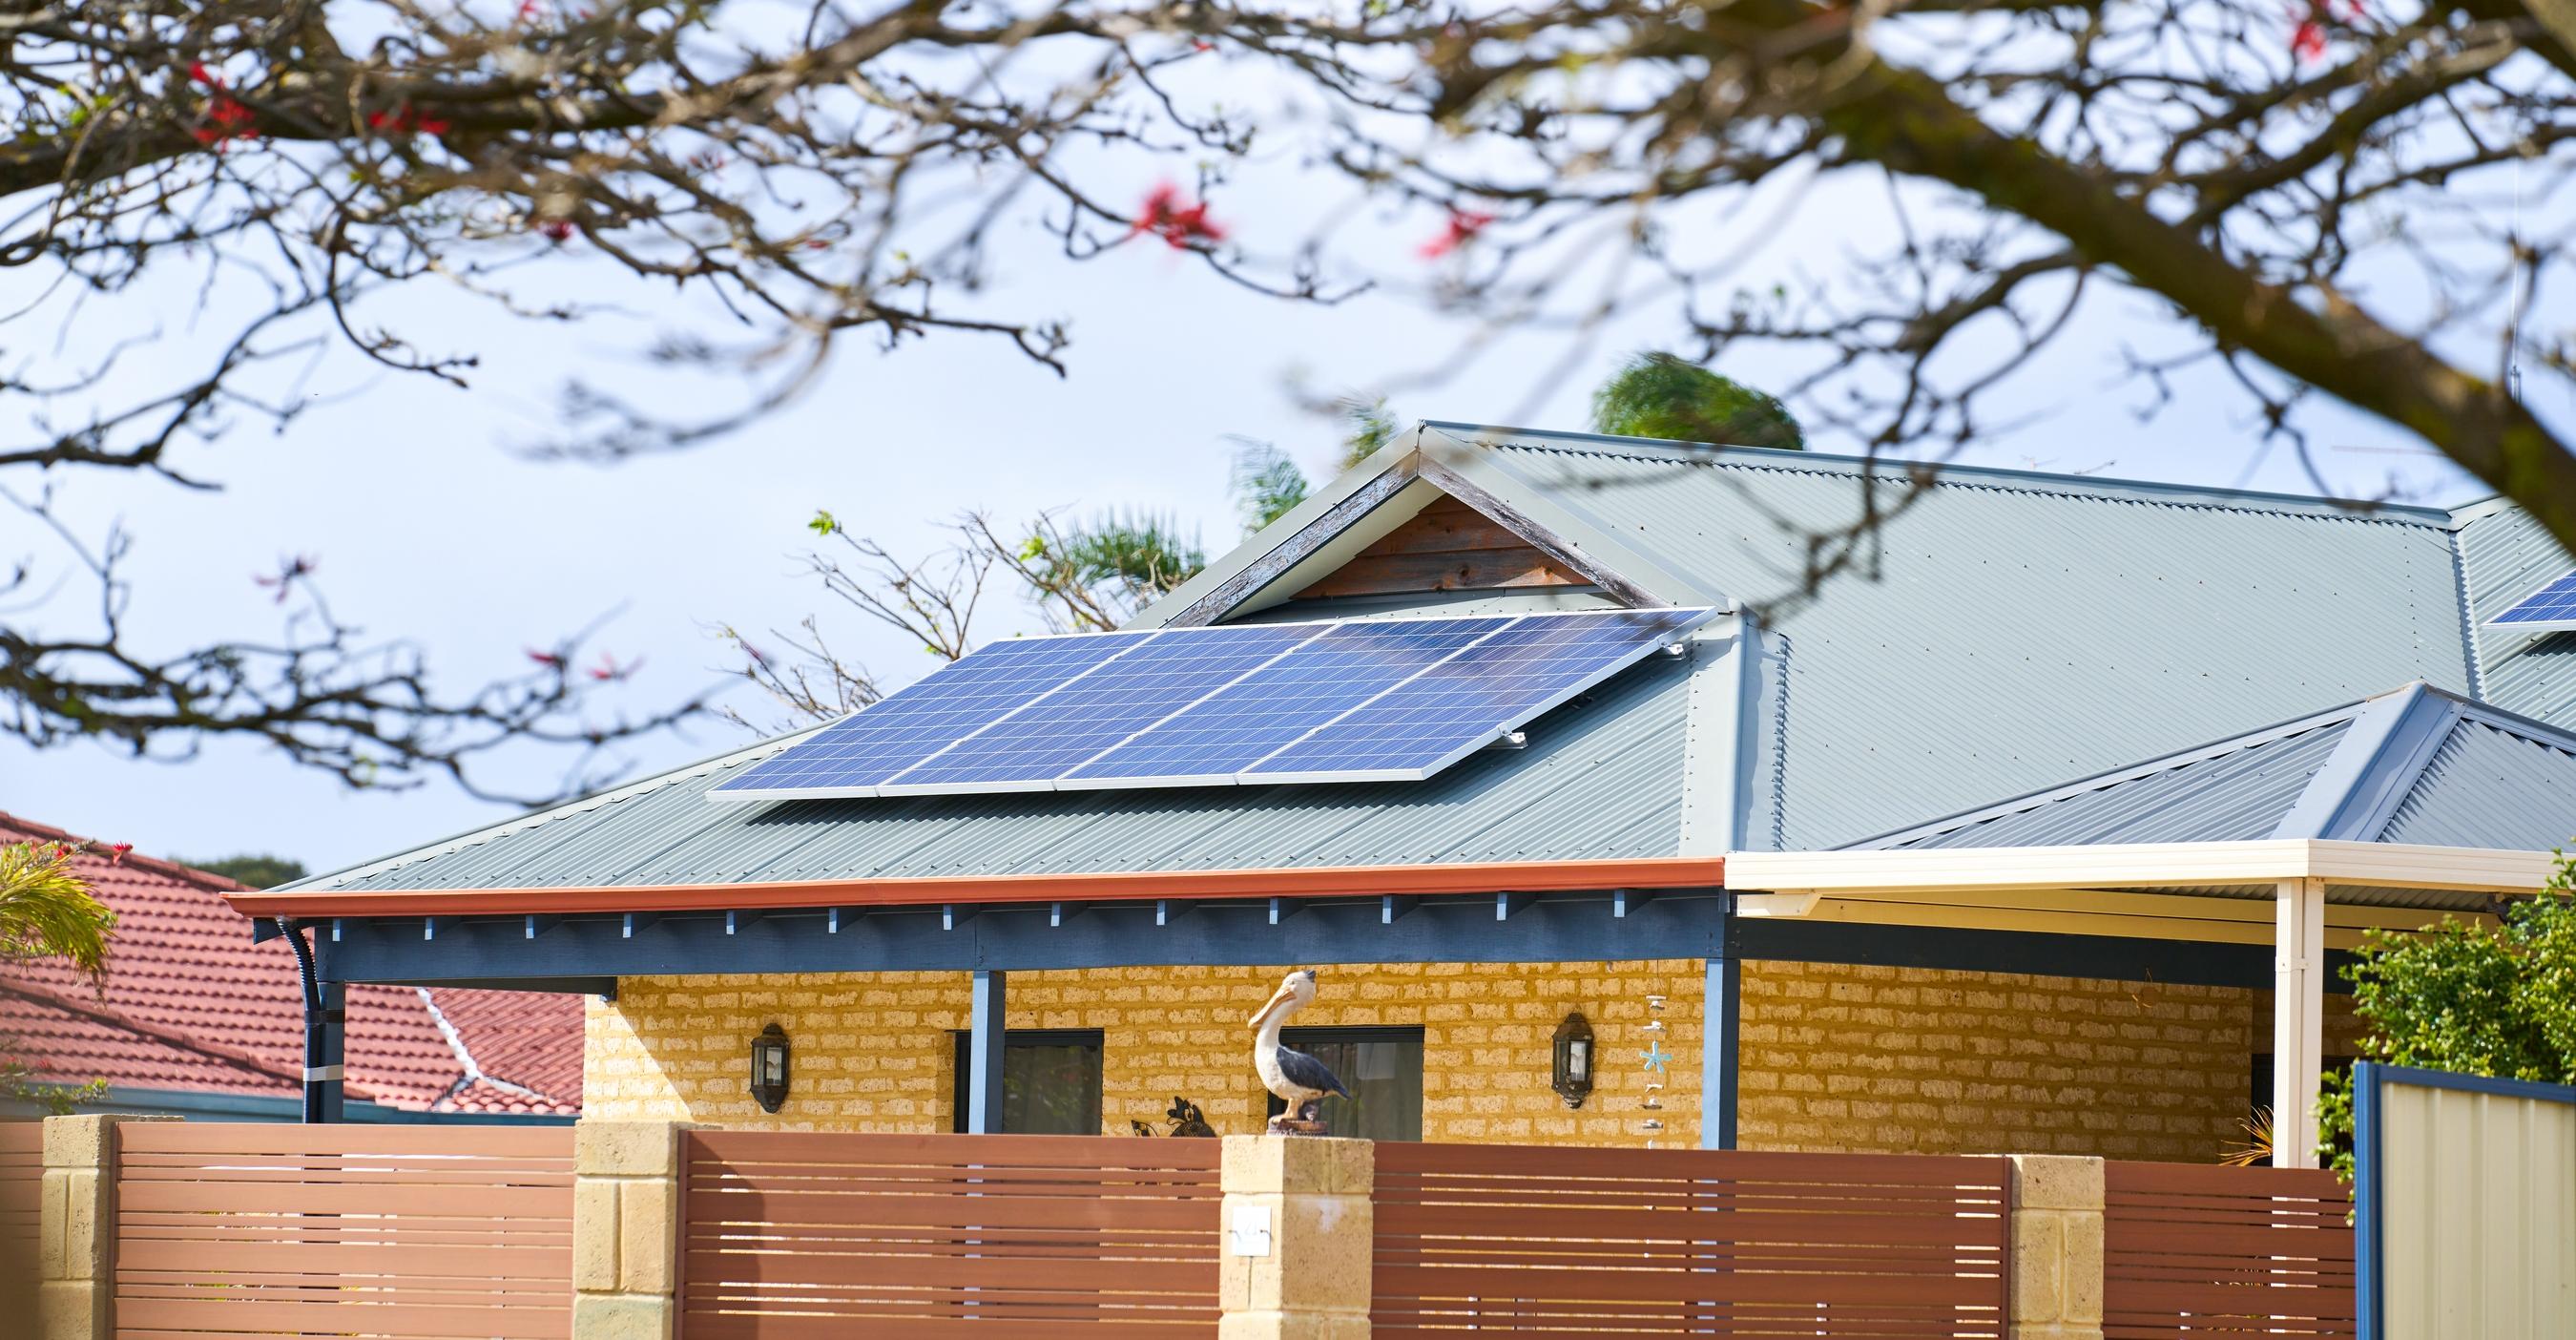 A shot of solar panels on a roof in Kennedy suburb in Western Australia